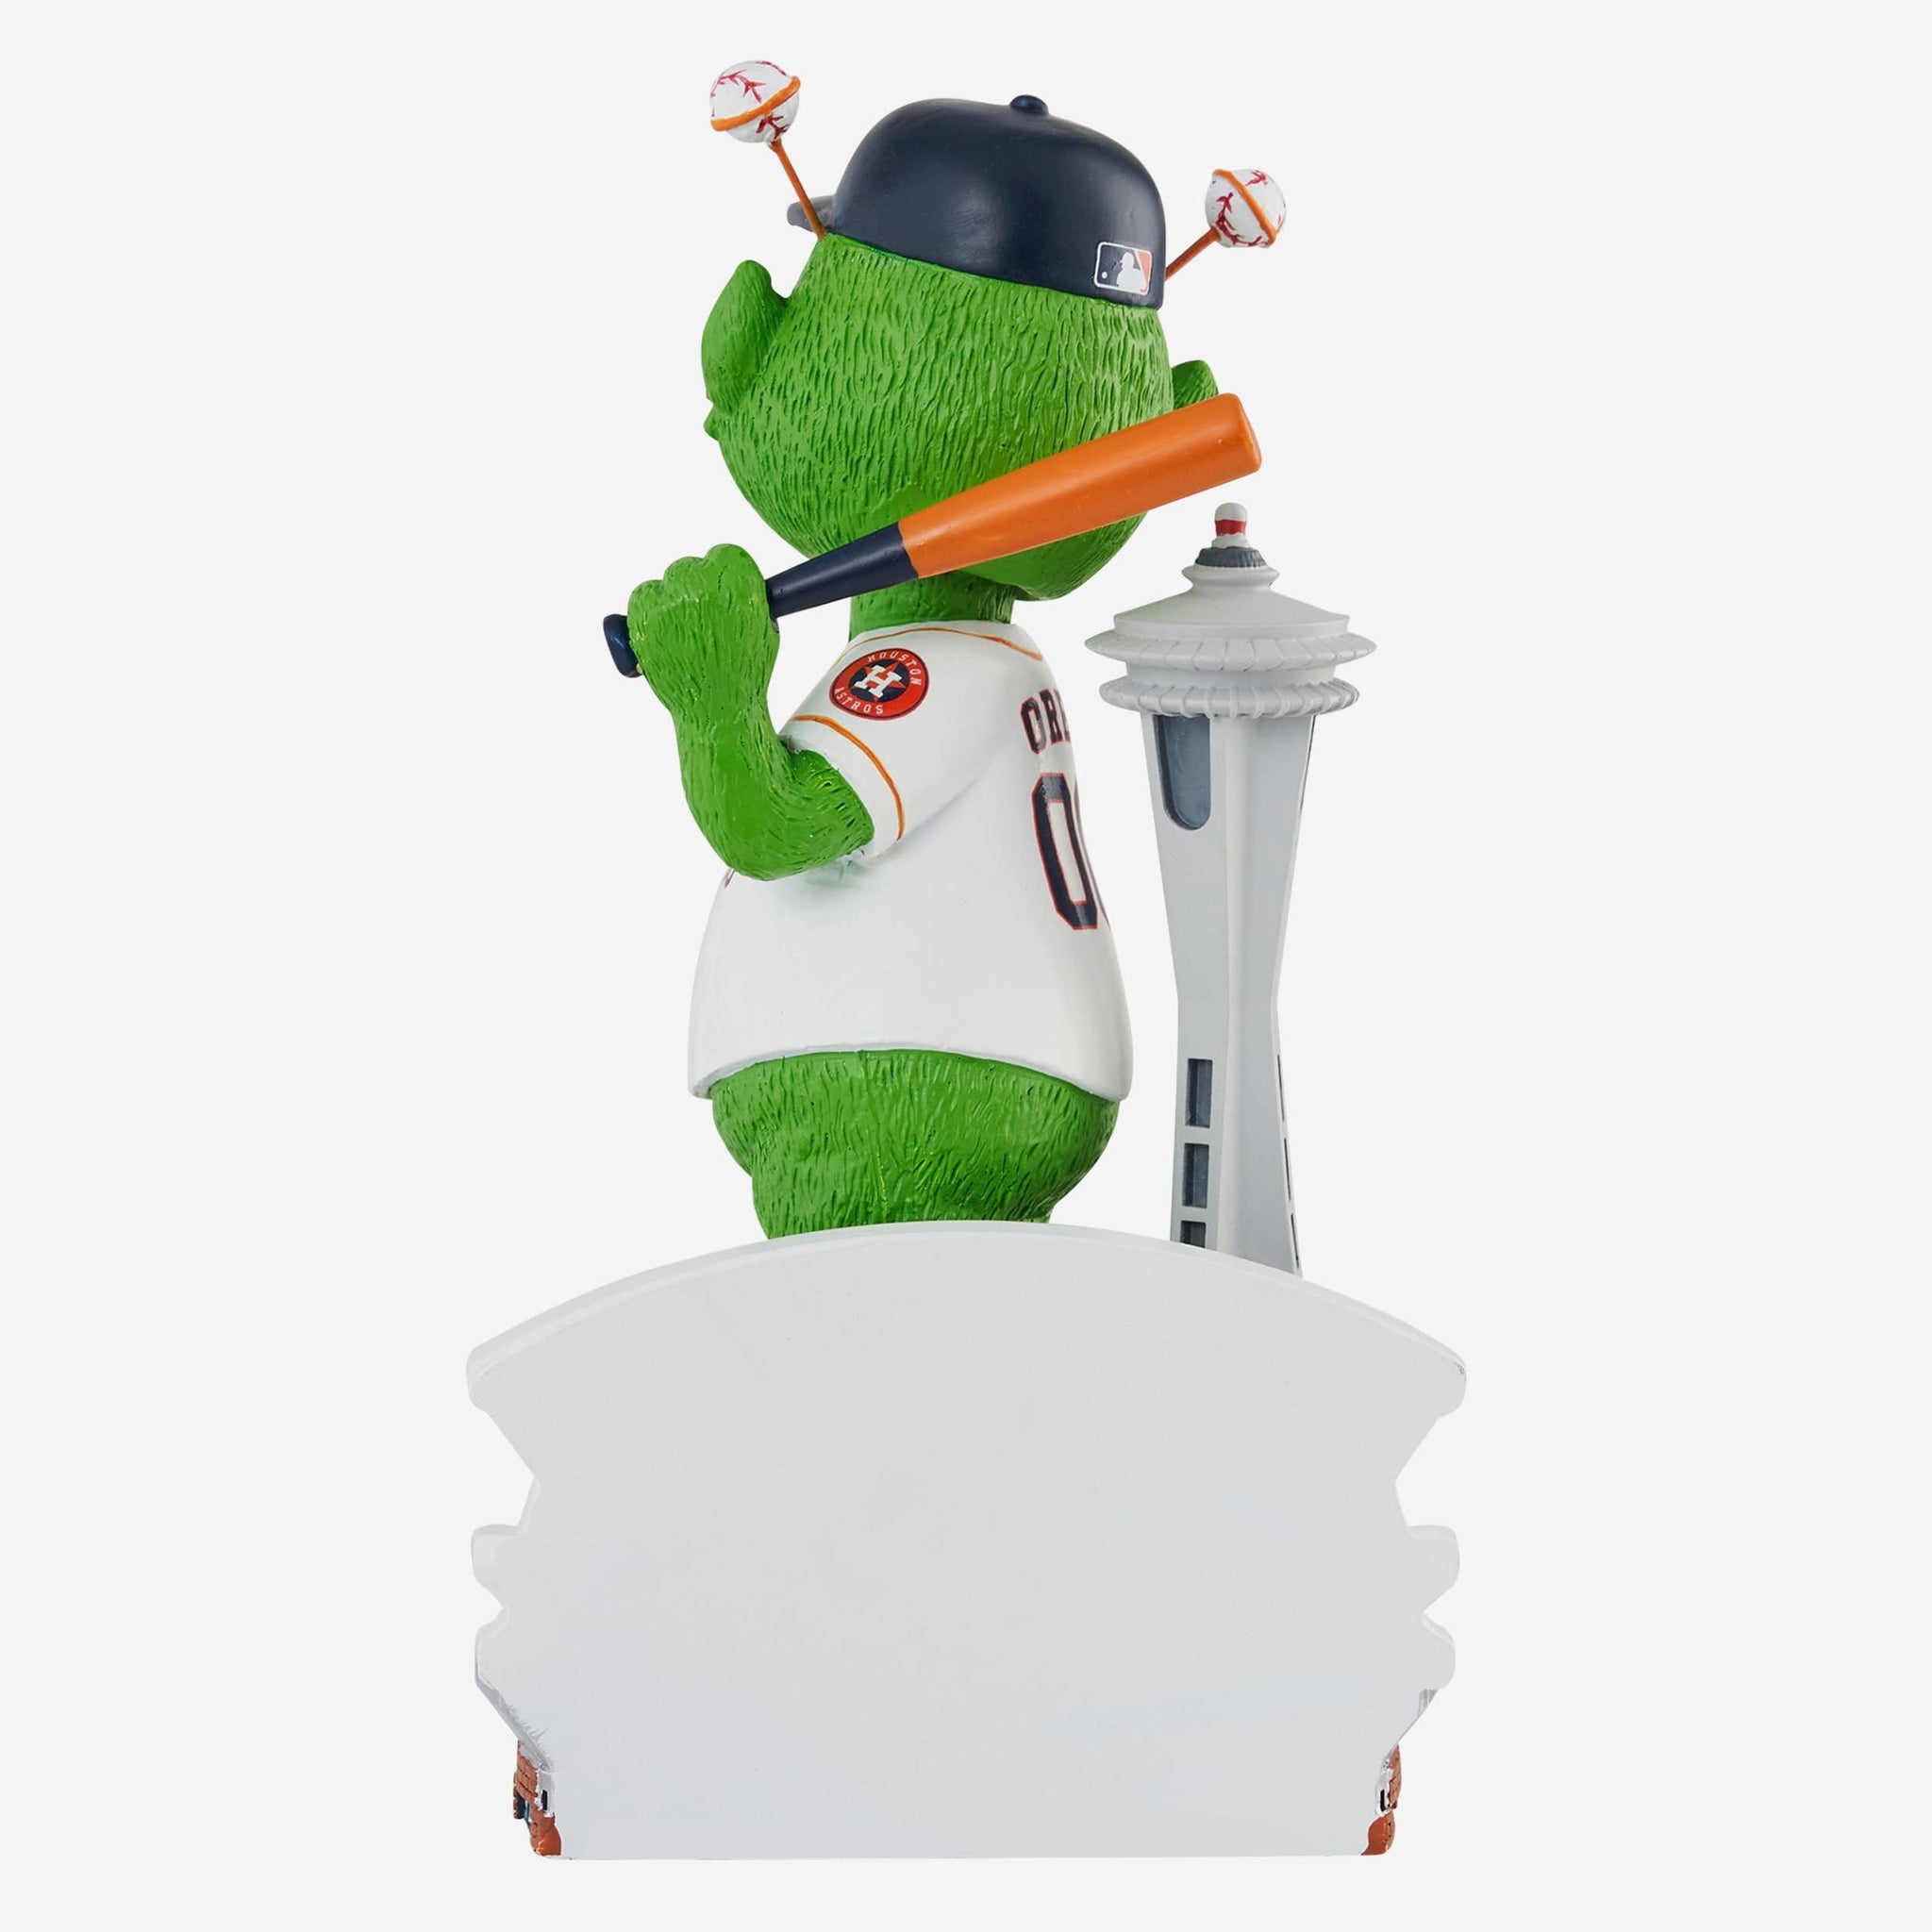 Houston Astros on X: Tomorrow is @OrbitAstros birthday! We're celebrating  with a Birthday Bash in Union Station with Orbit's mascot friends, Orbit  Bobbleheads to 10,000 lucky fans, and an Orbit Birthday T-Shirt